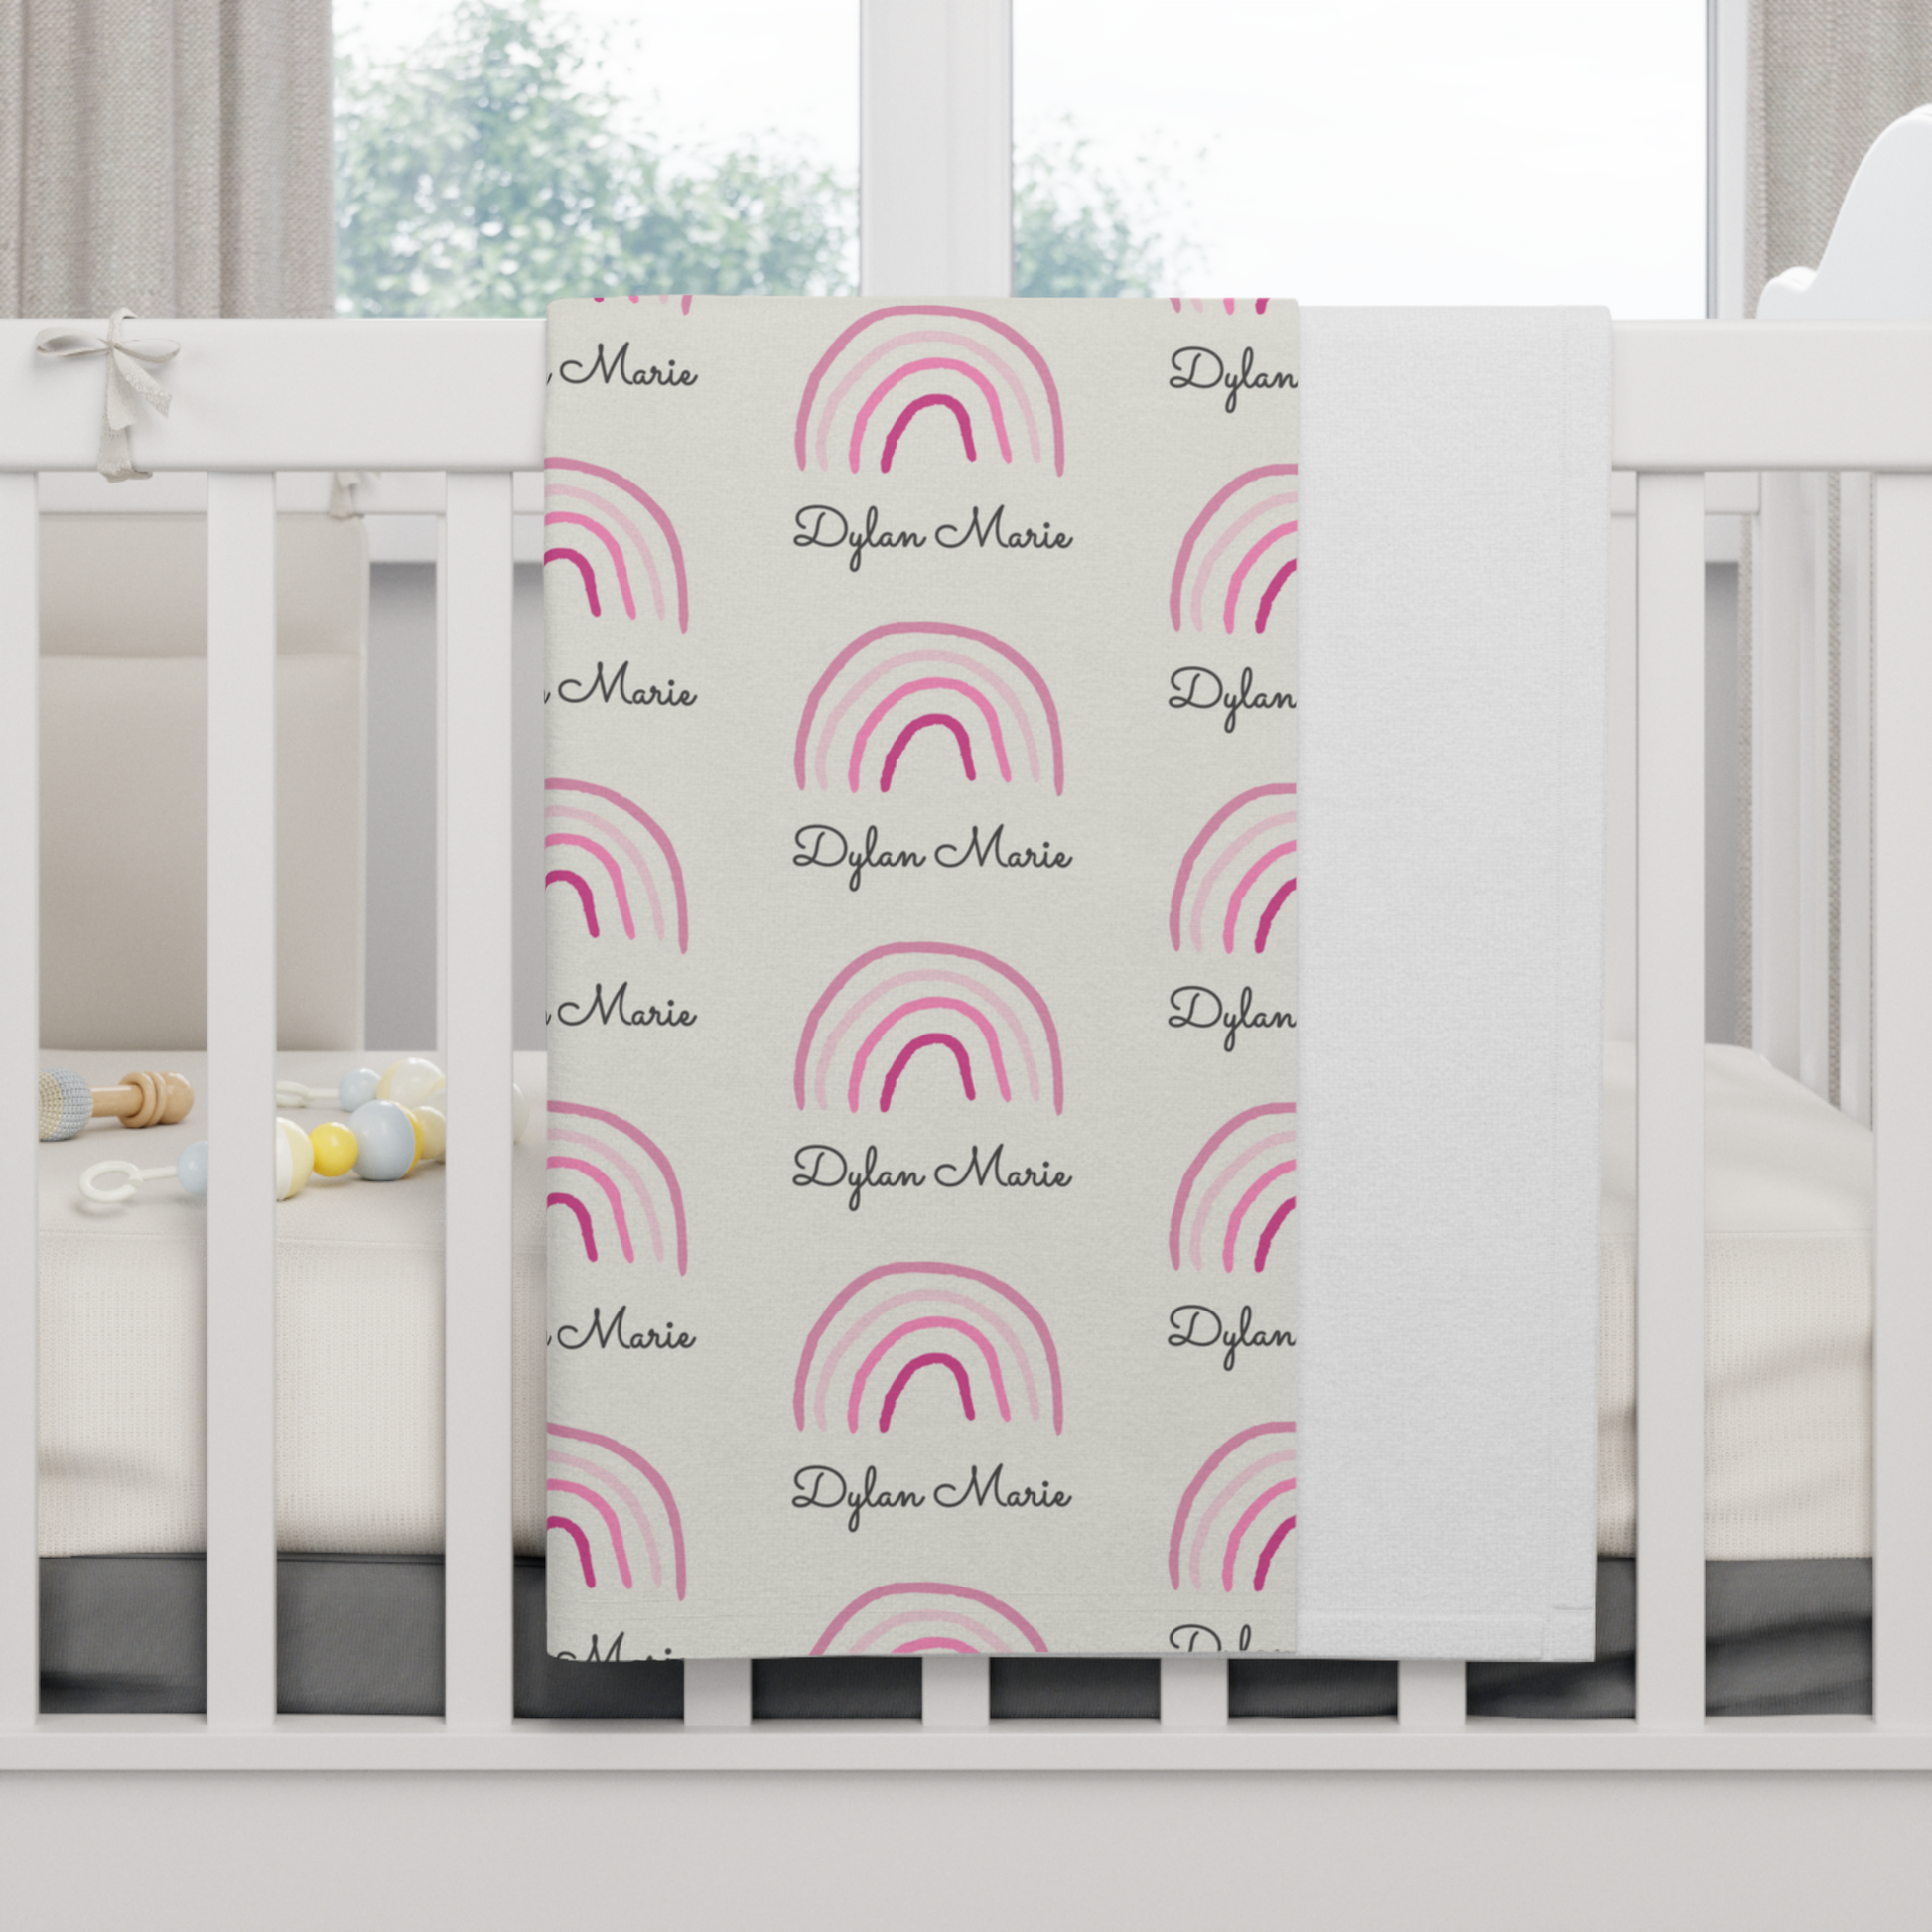 Fleece personalized baby blanket in pink rainbow pattern hung over side of white crib with window in the background